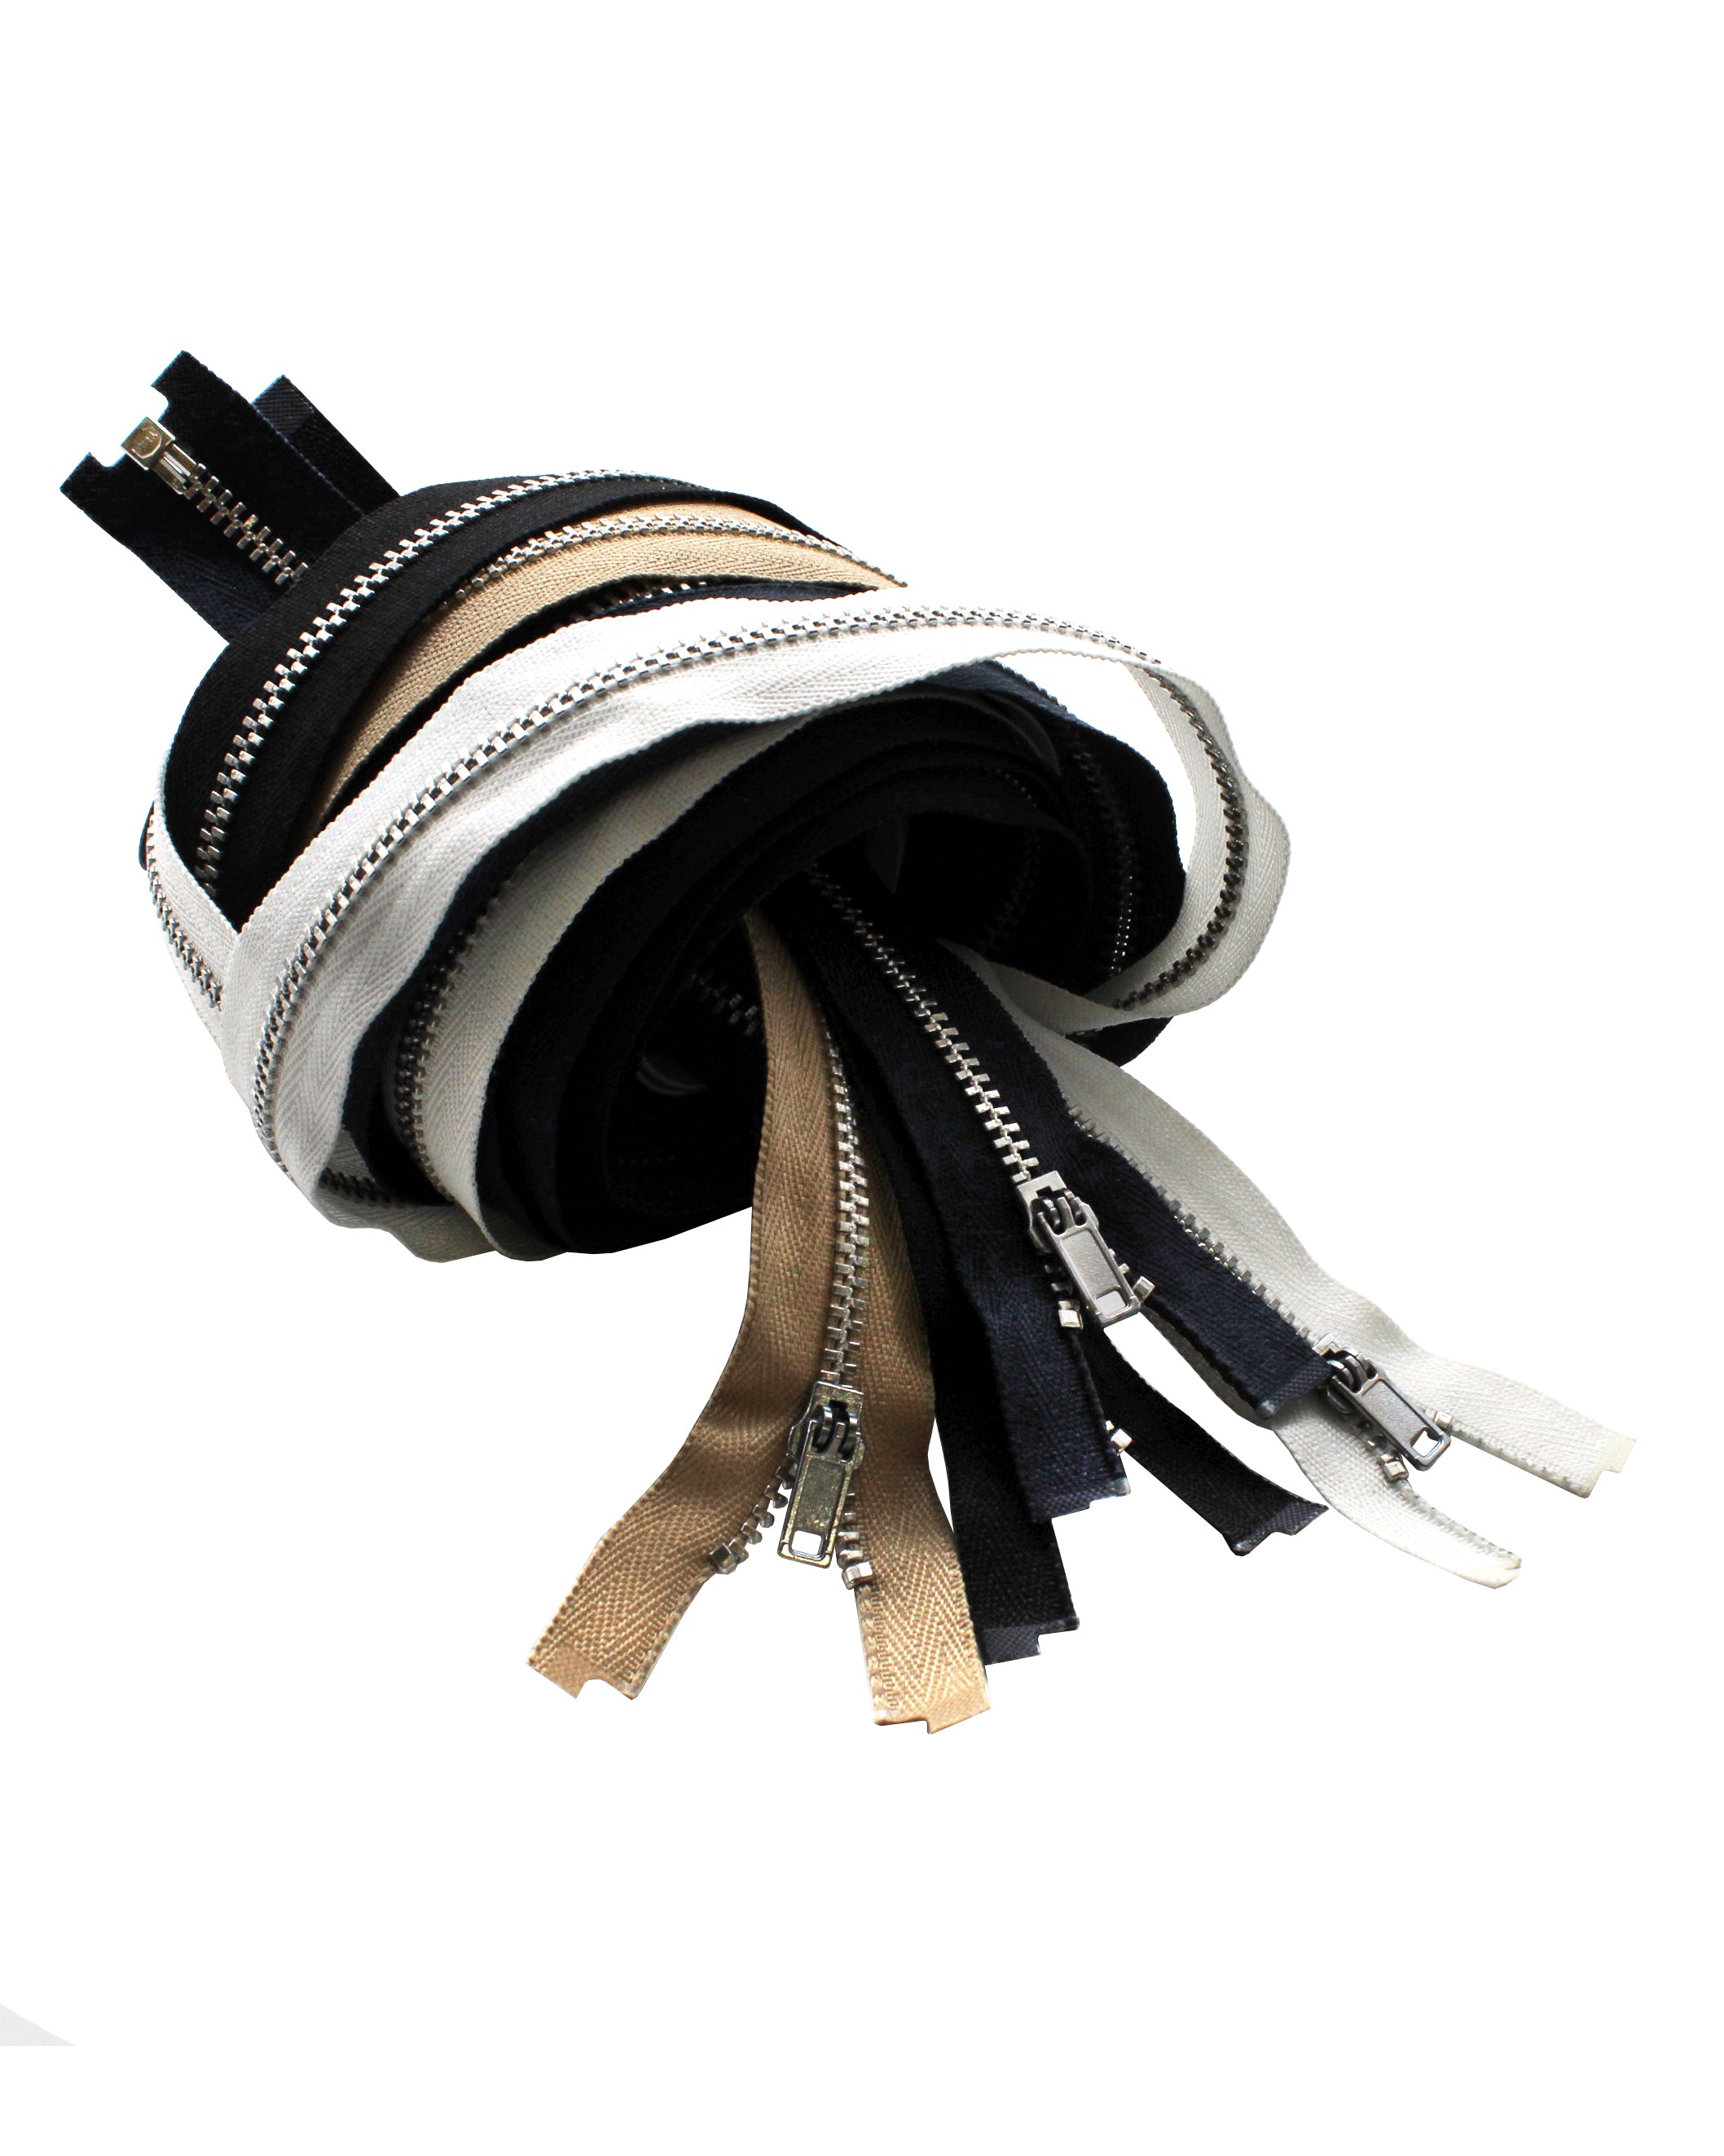 YKK® #3 Thin Nylon-Coil Jacket Separating Zippers - Stock Colors